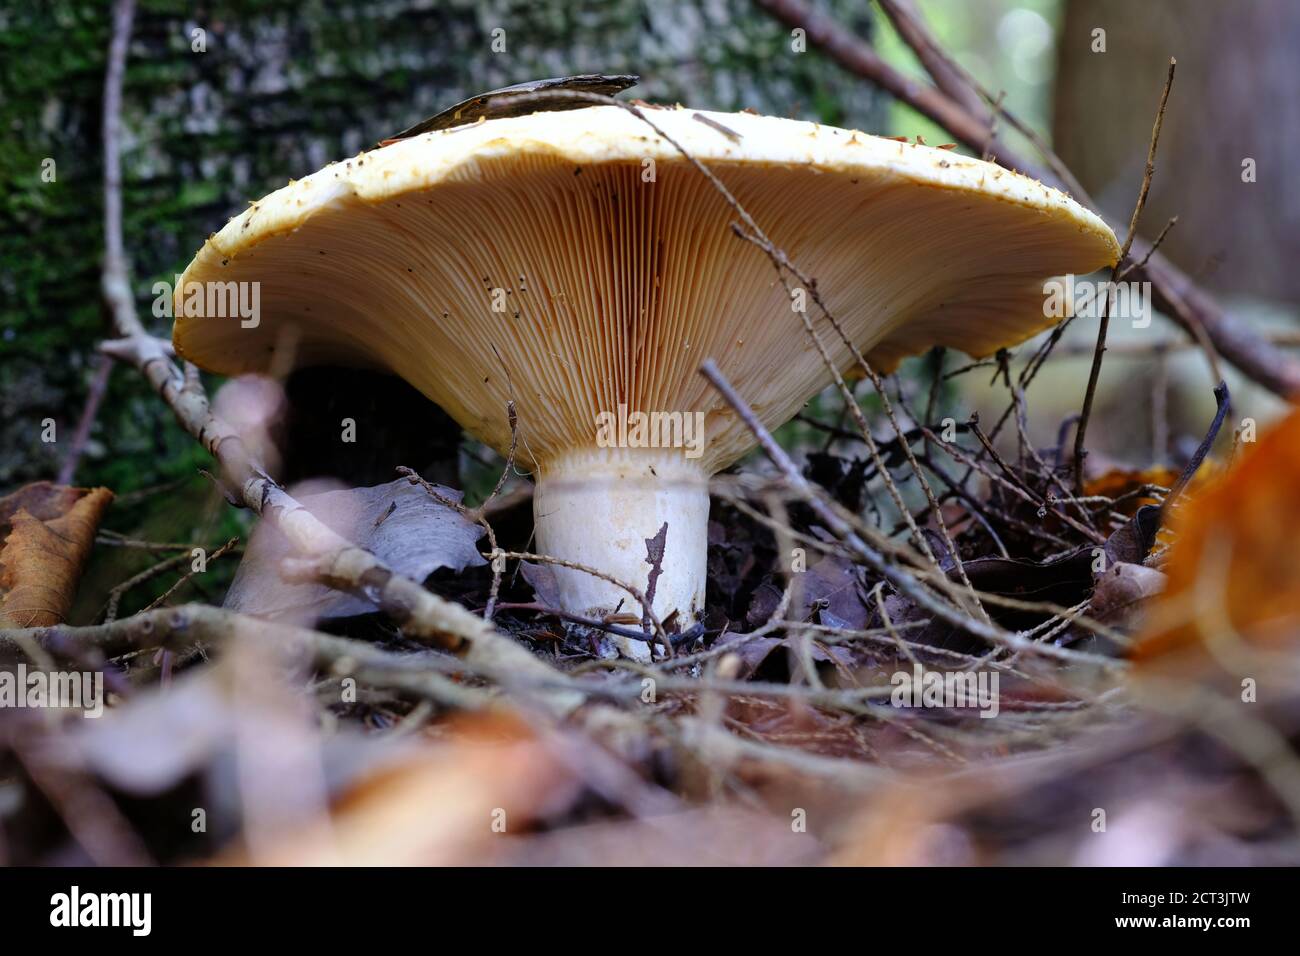 Large white capped gill fungus (Lactifluus vellereus? Russula brevipes?) thrusting up through the forest floor leaf litter in Val-des-Monts, Quebec. Stock Photo